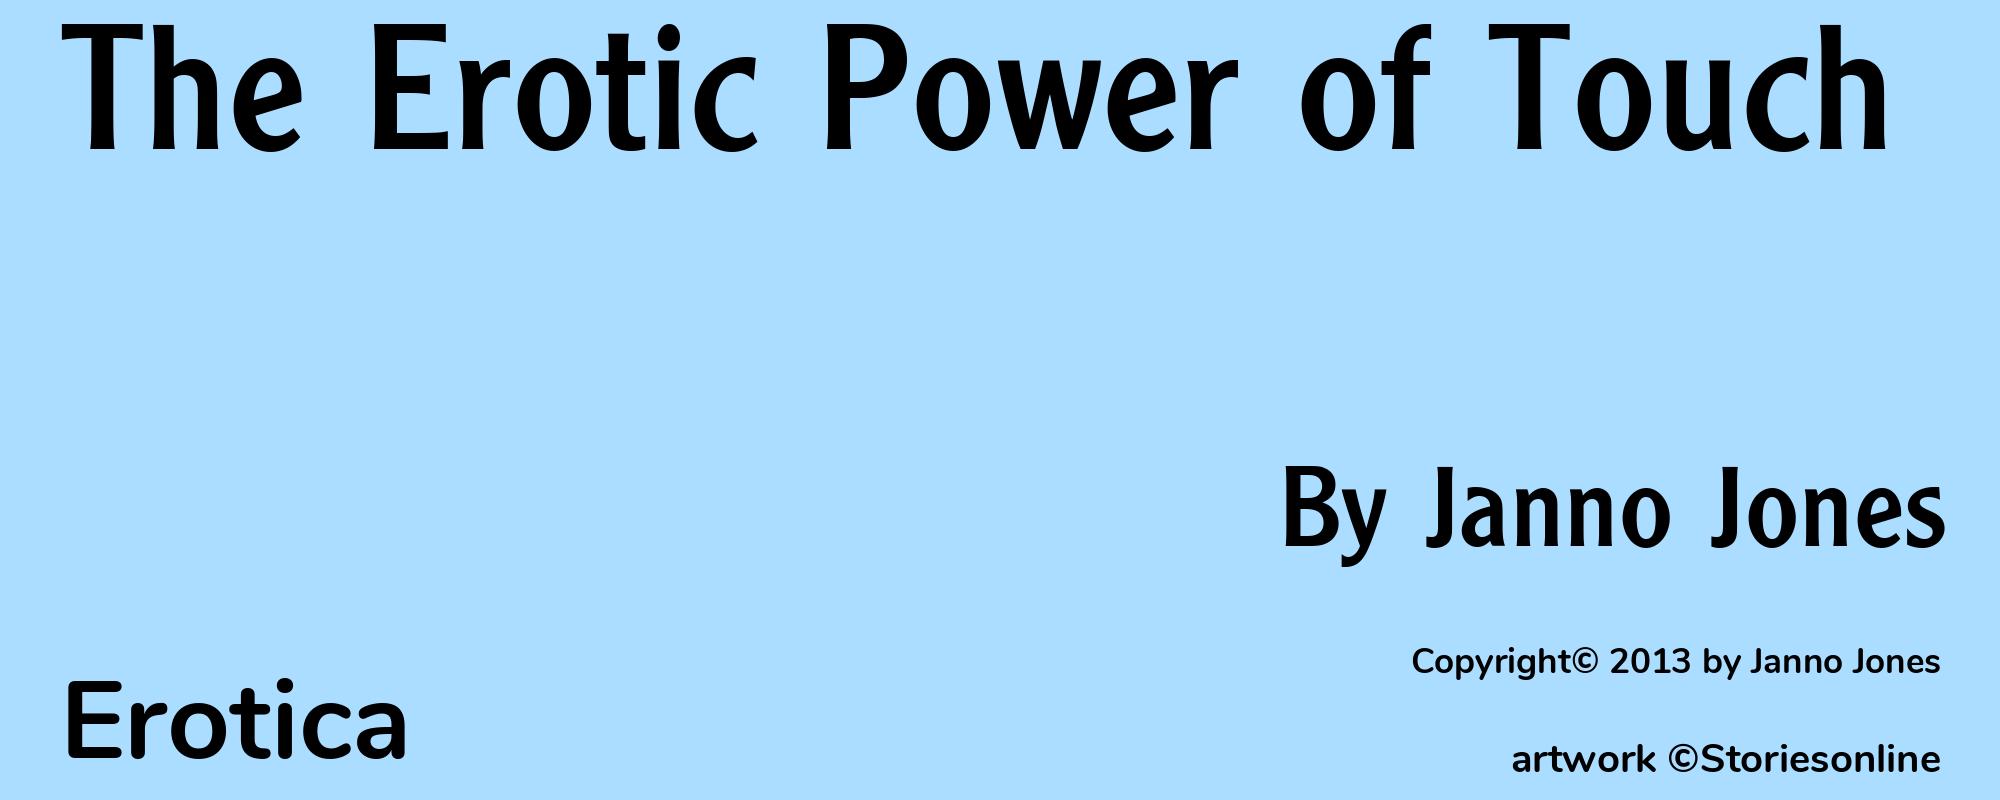 The Erotic Power of Touch - Cover